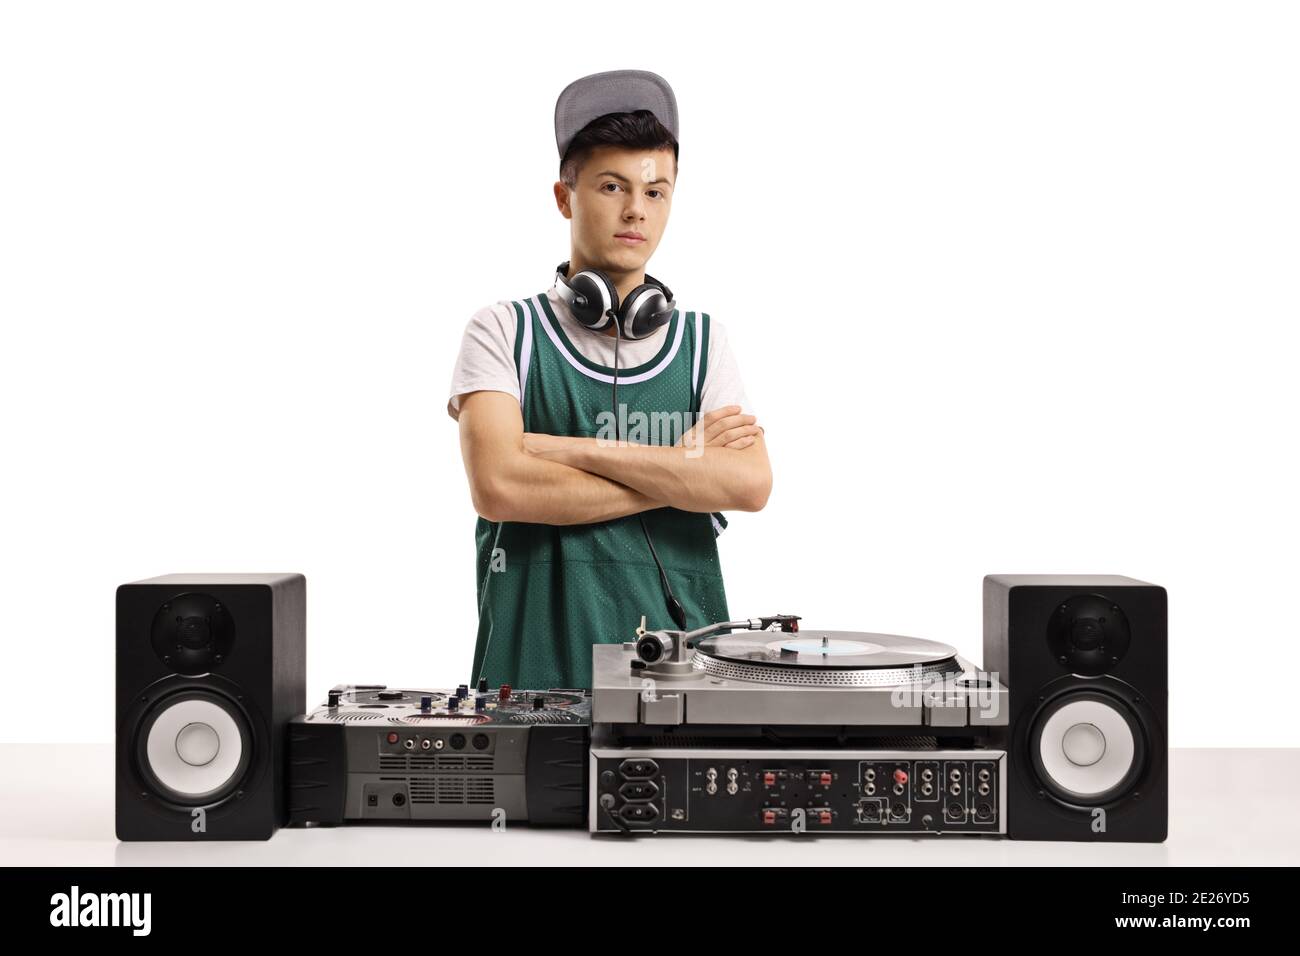 Young male dj with vinyl turntable posing with crossed arms isolated on white background Stock Photo